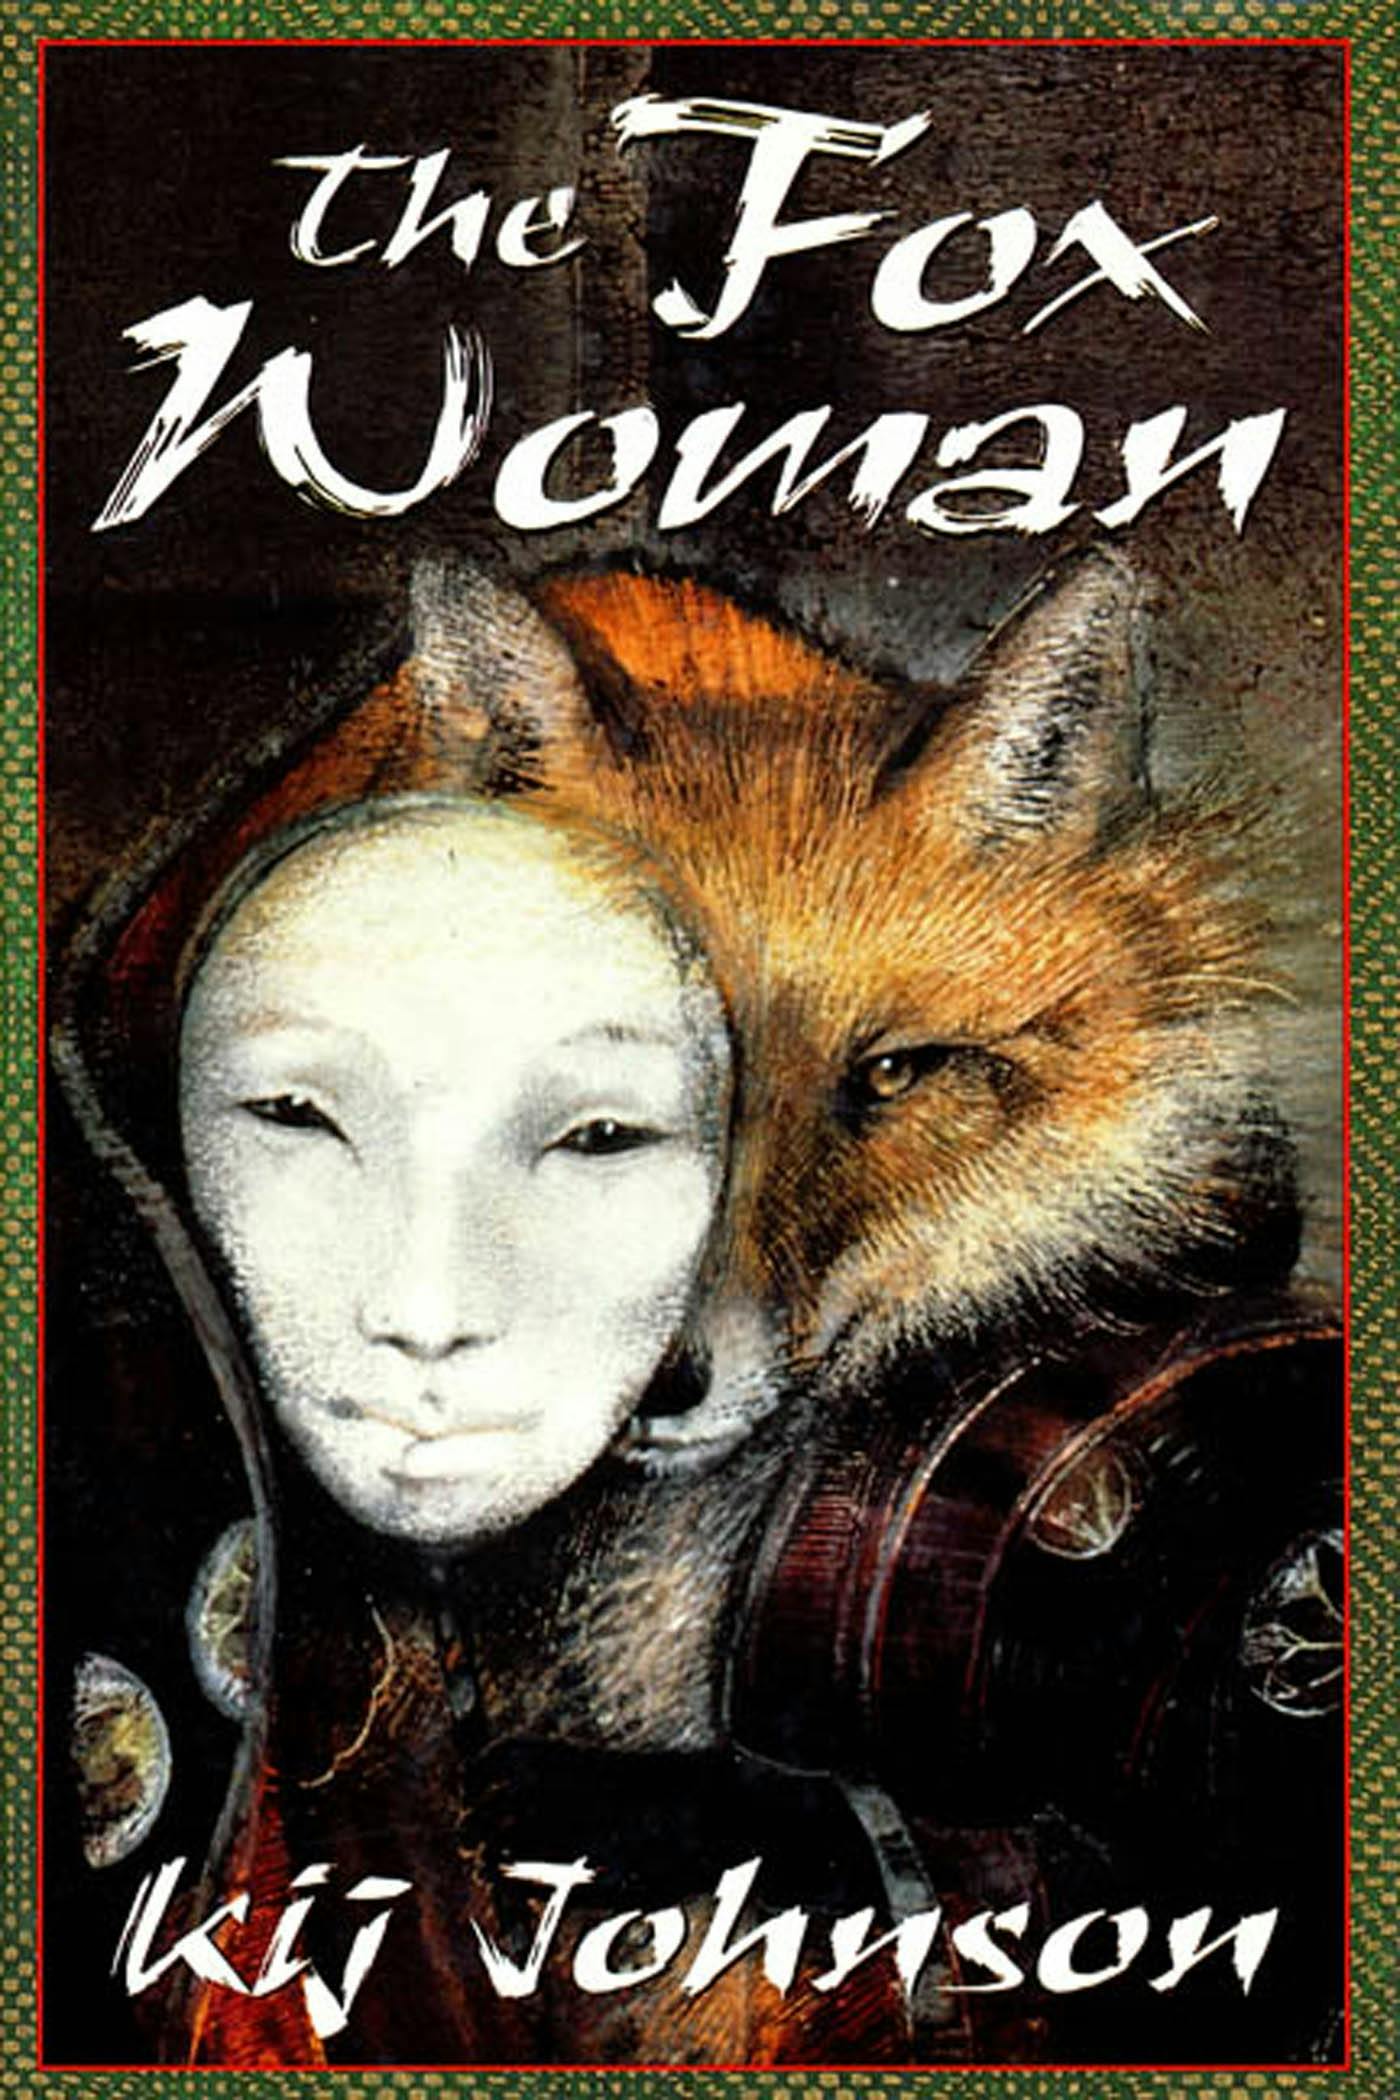 Cover for the book titled as: The Fox Woman